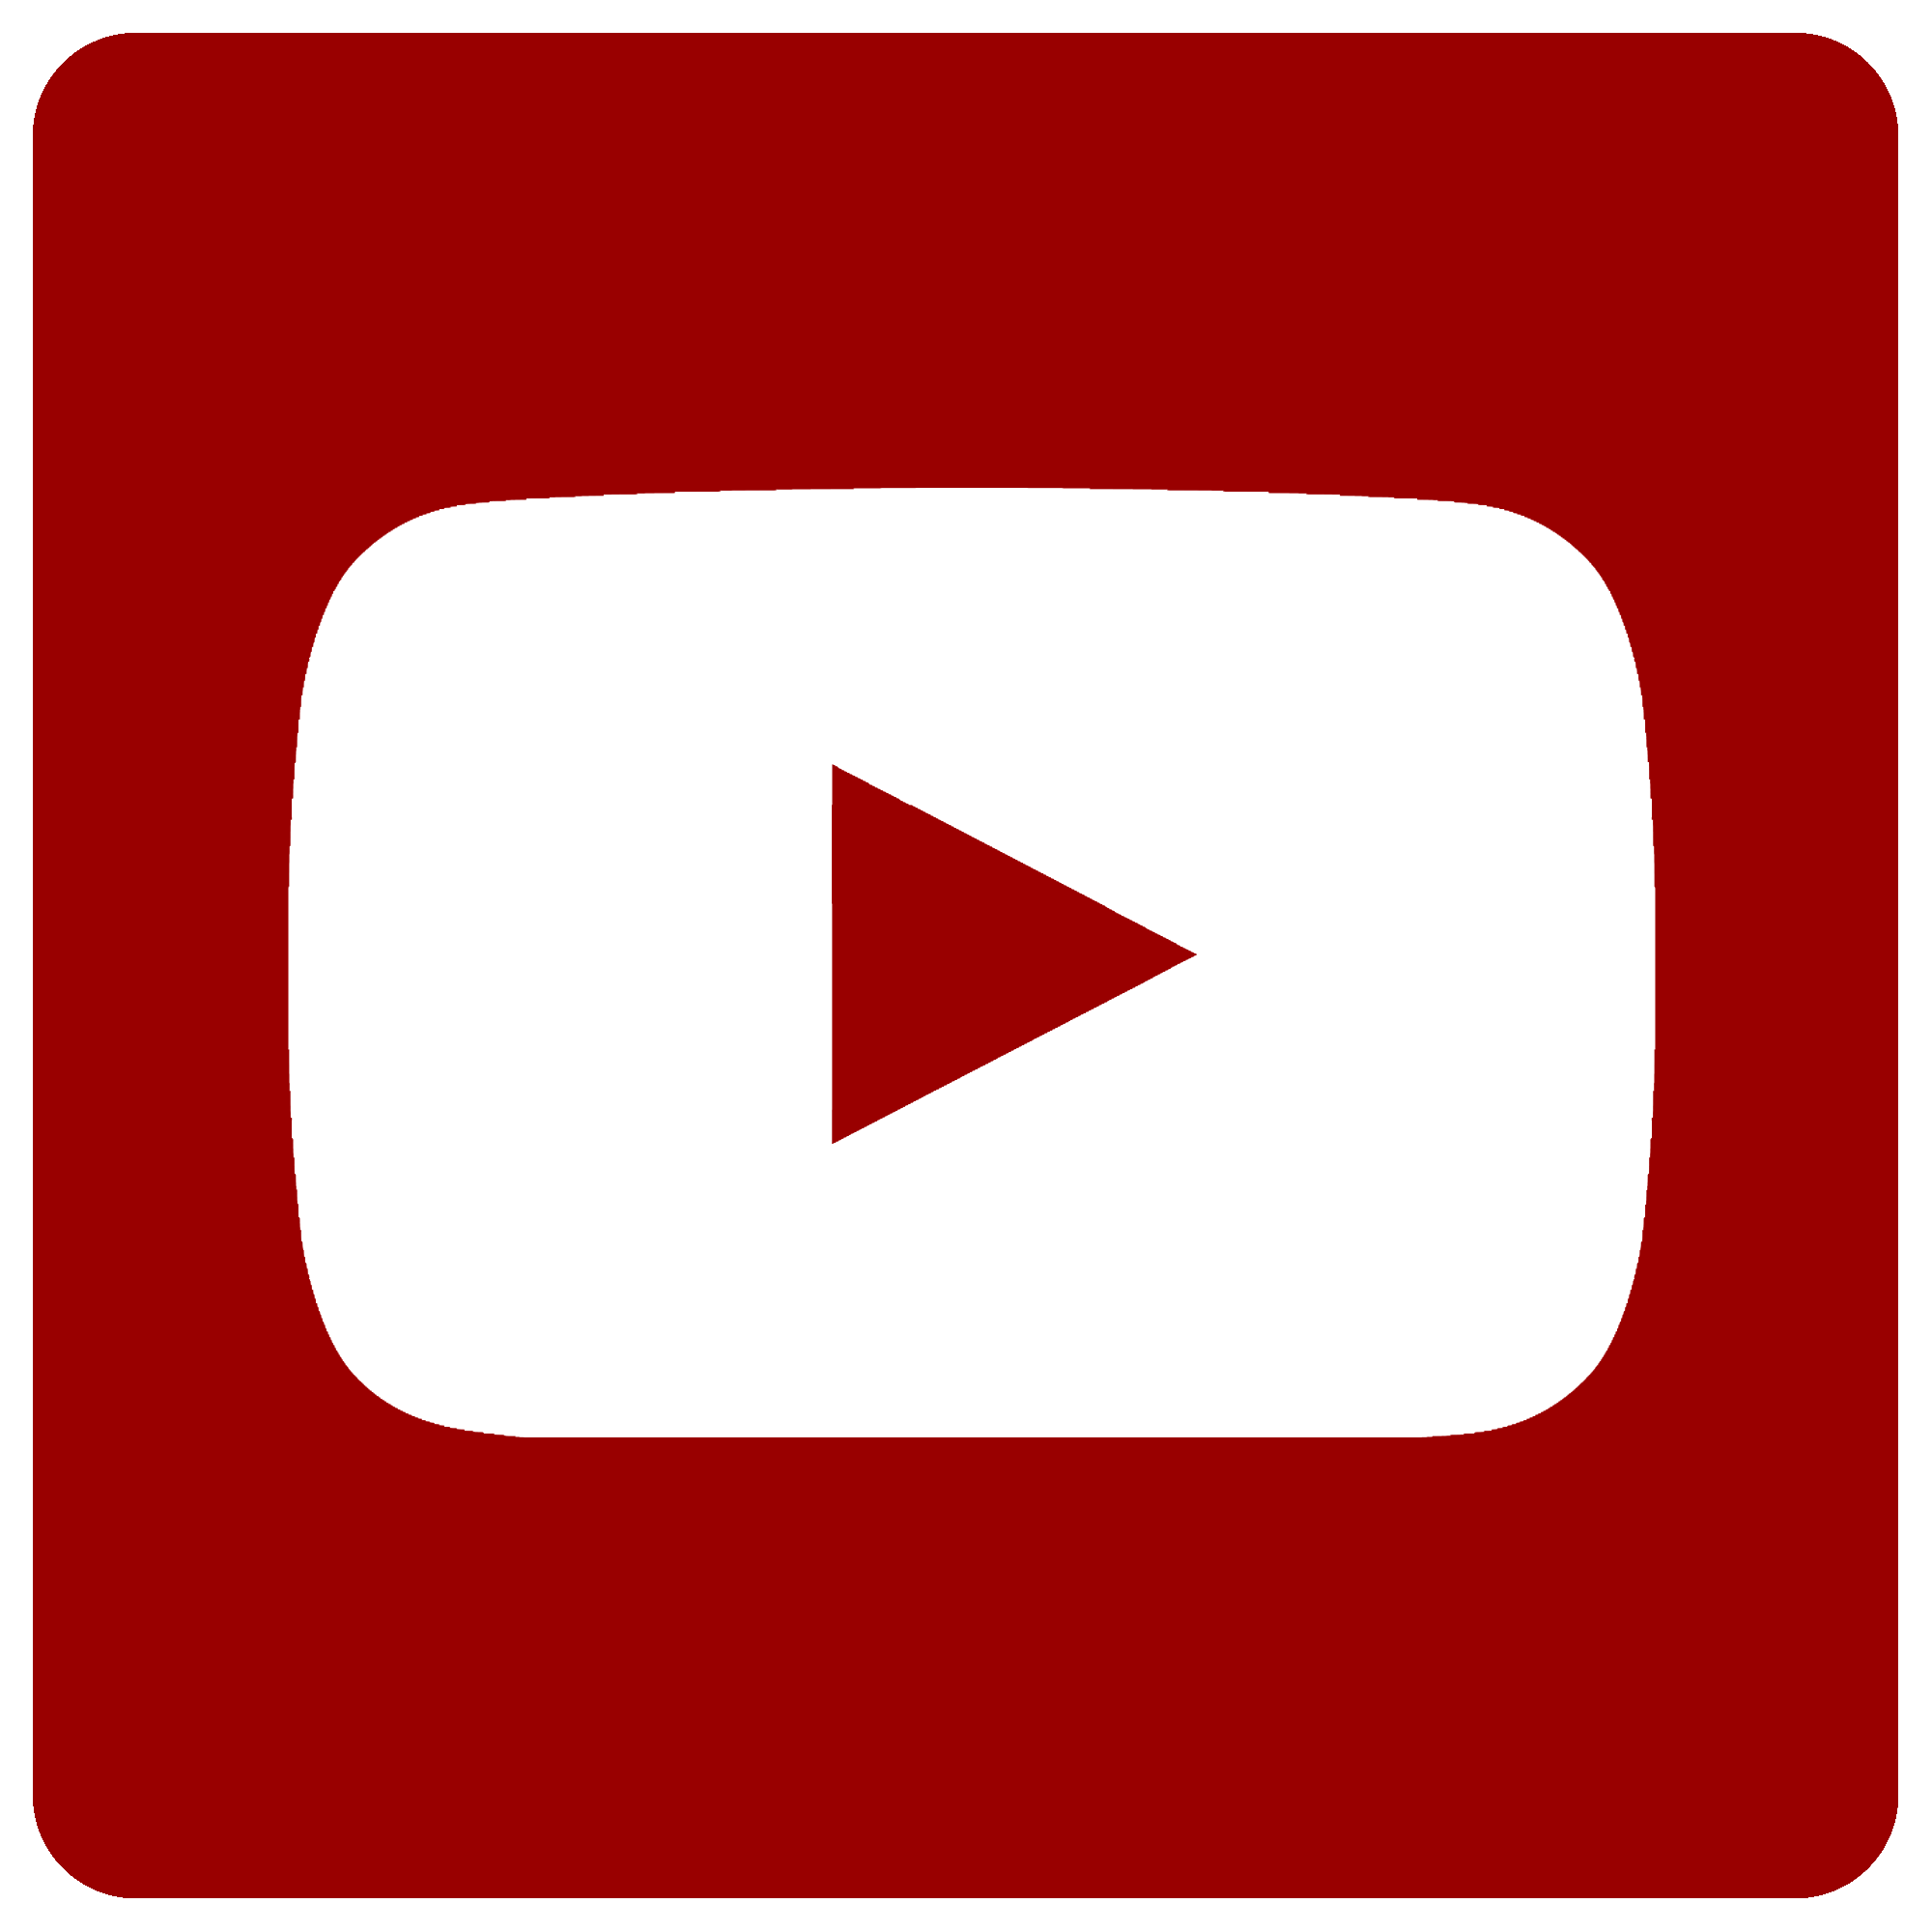 Red YouTube Logo - File:Youtube-logo-red.png - Wikimedia Commons